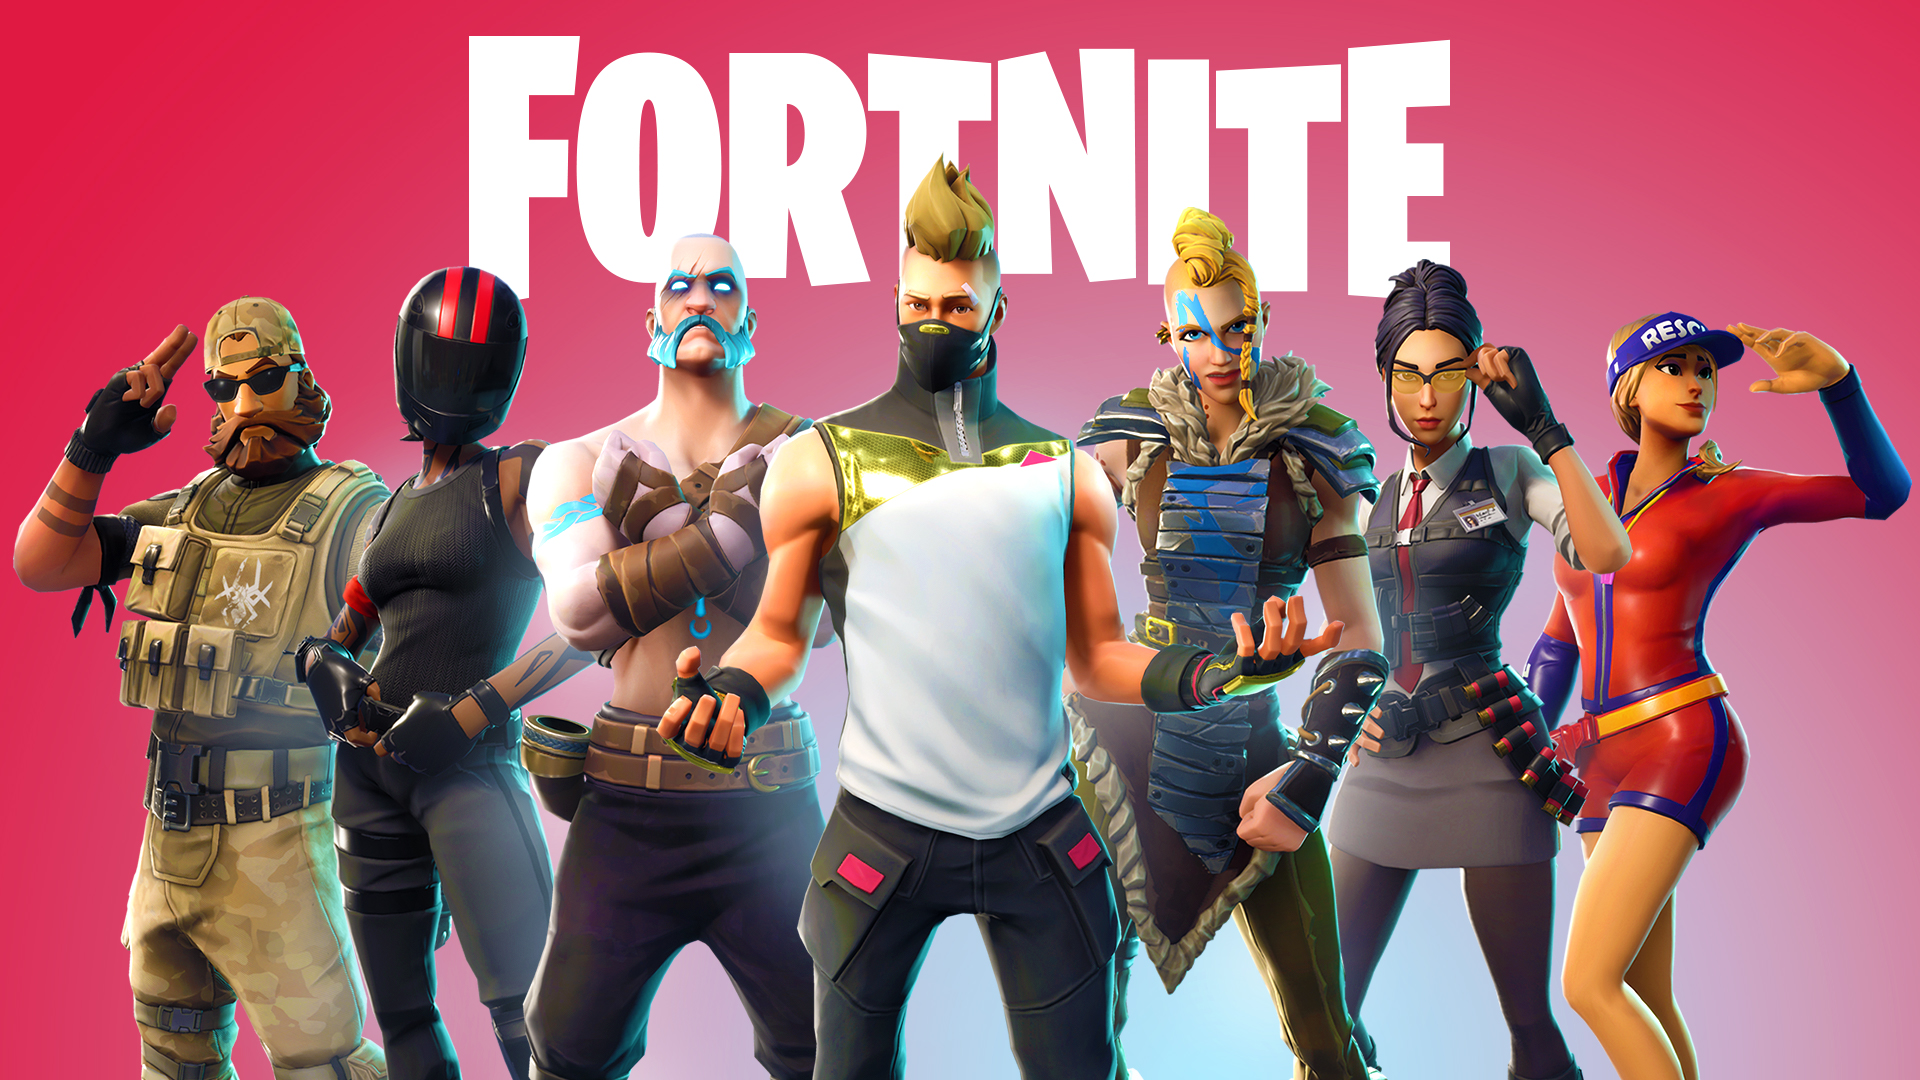 How to enable 2fa fortnite